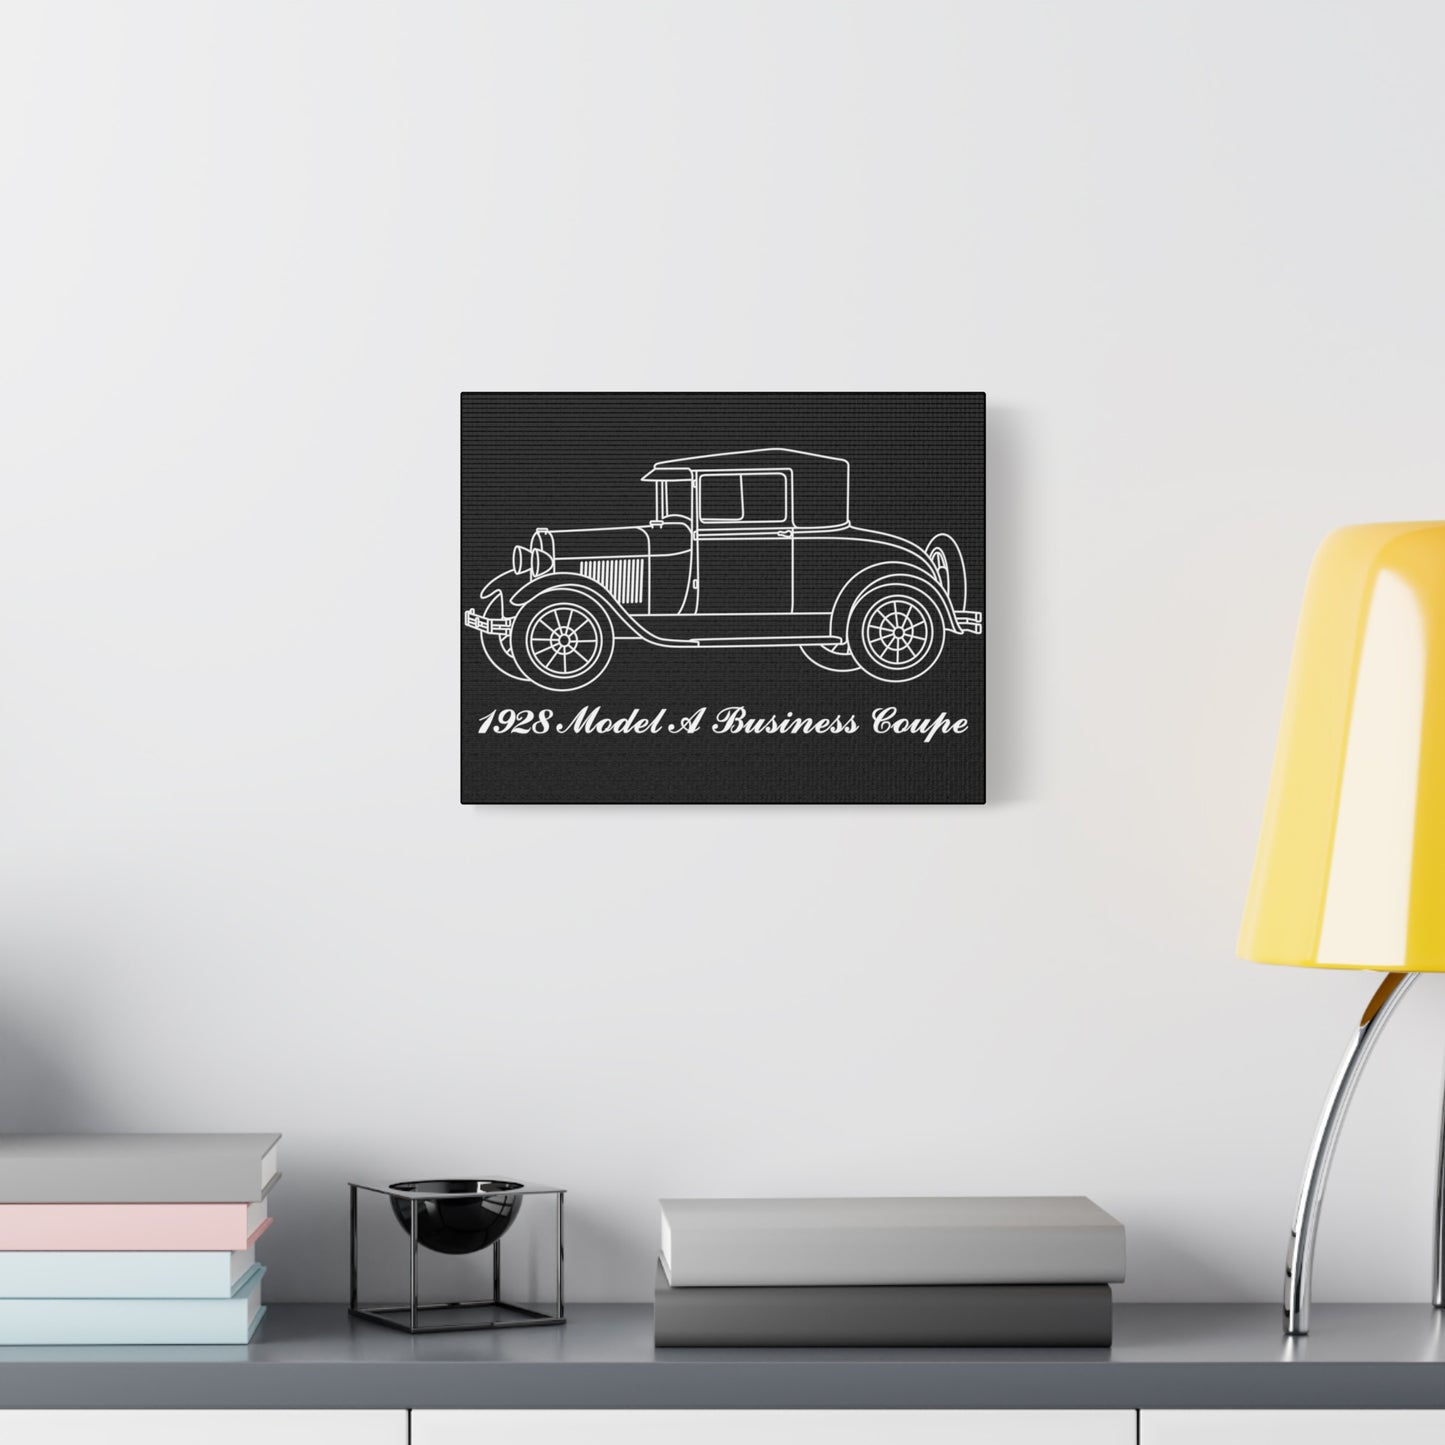 1928 Business Coupe Black Canvas Wall Art